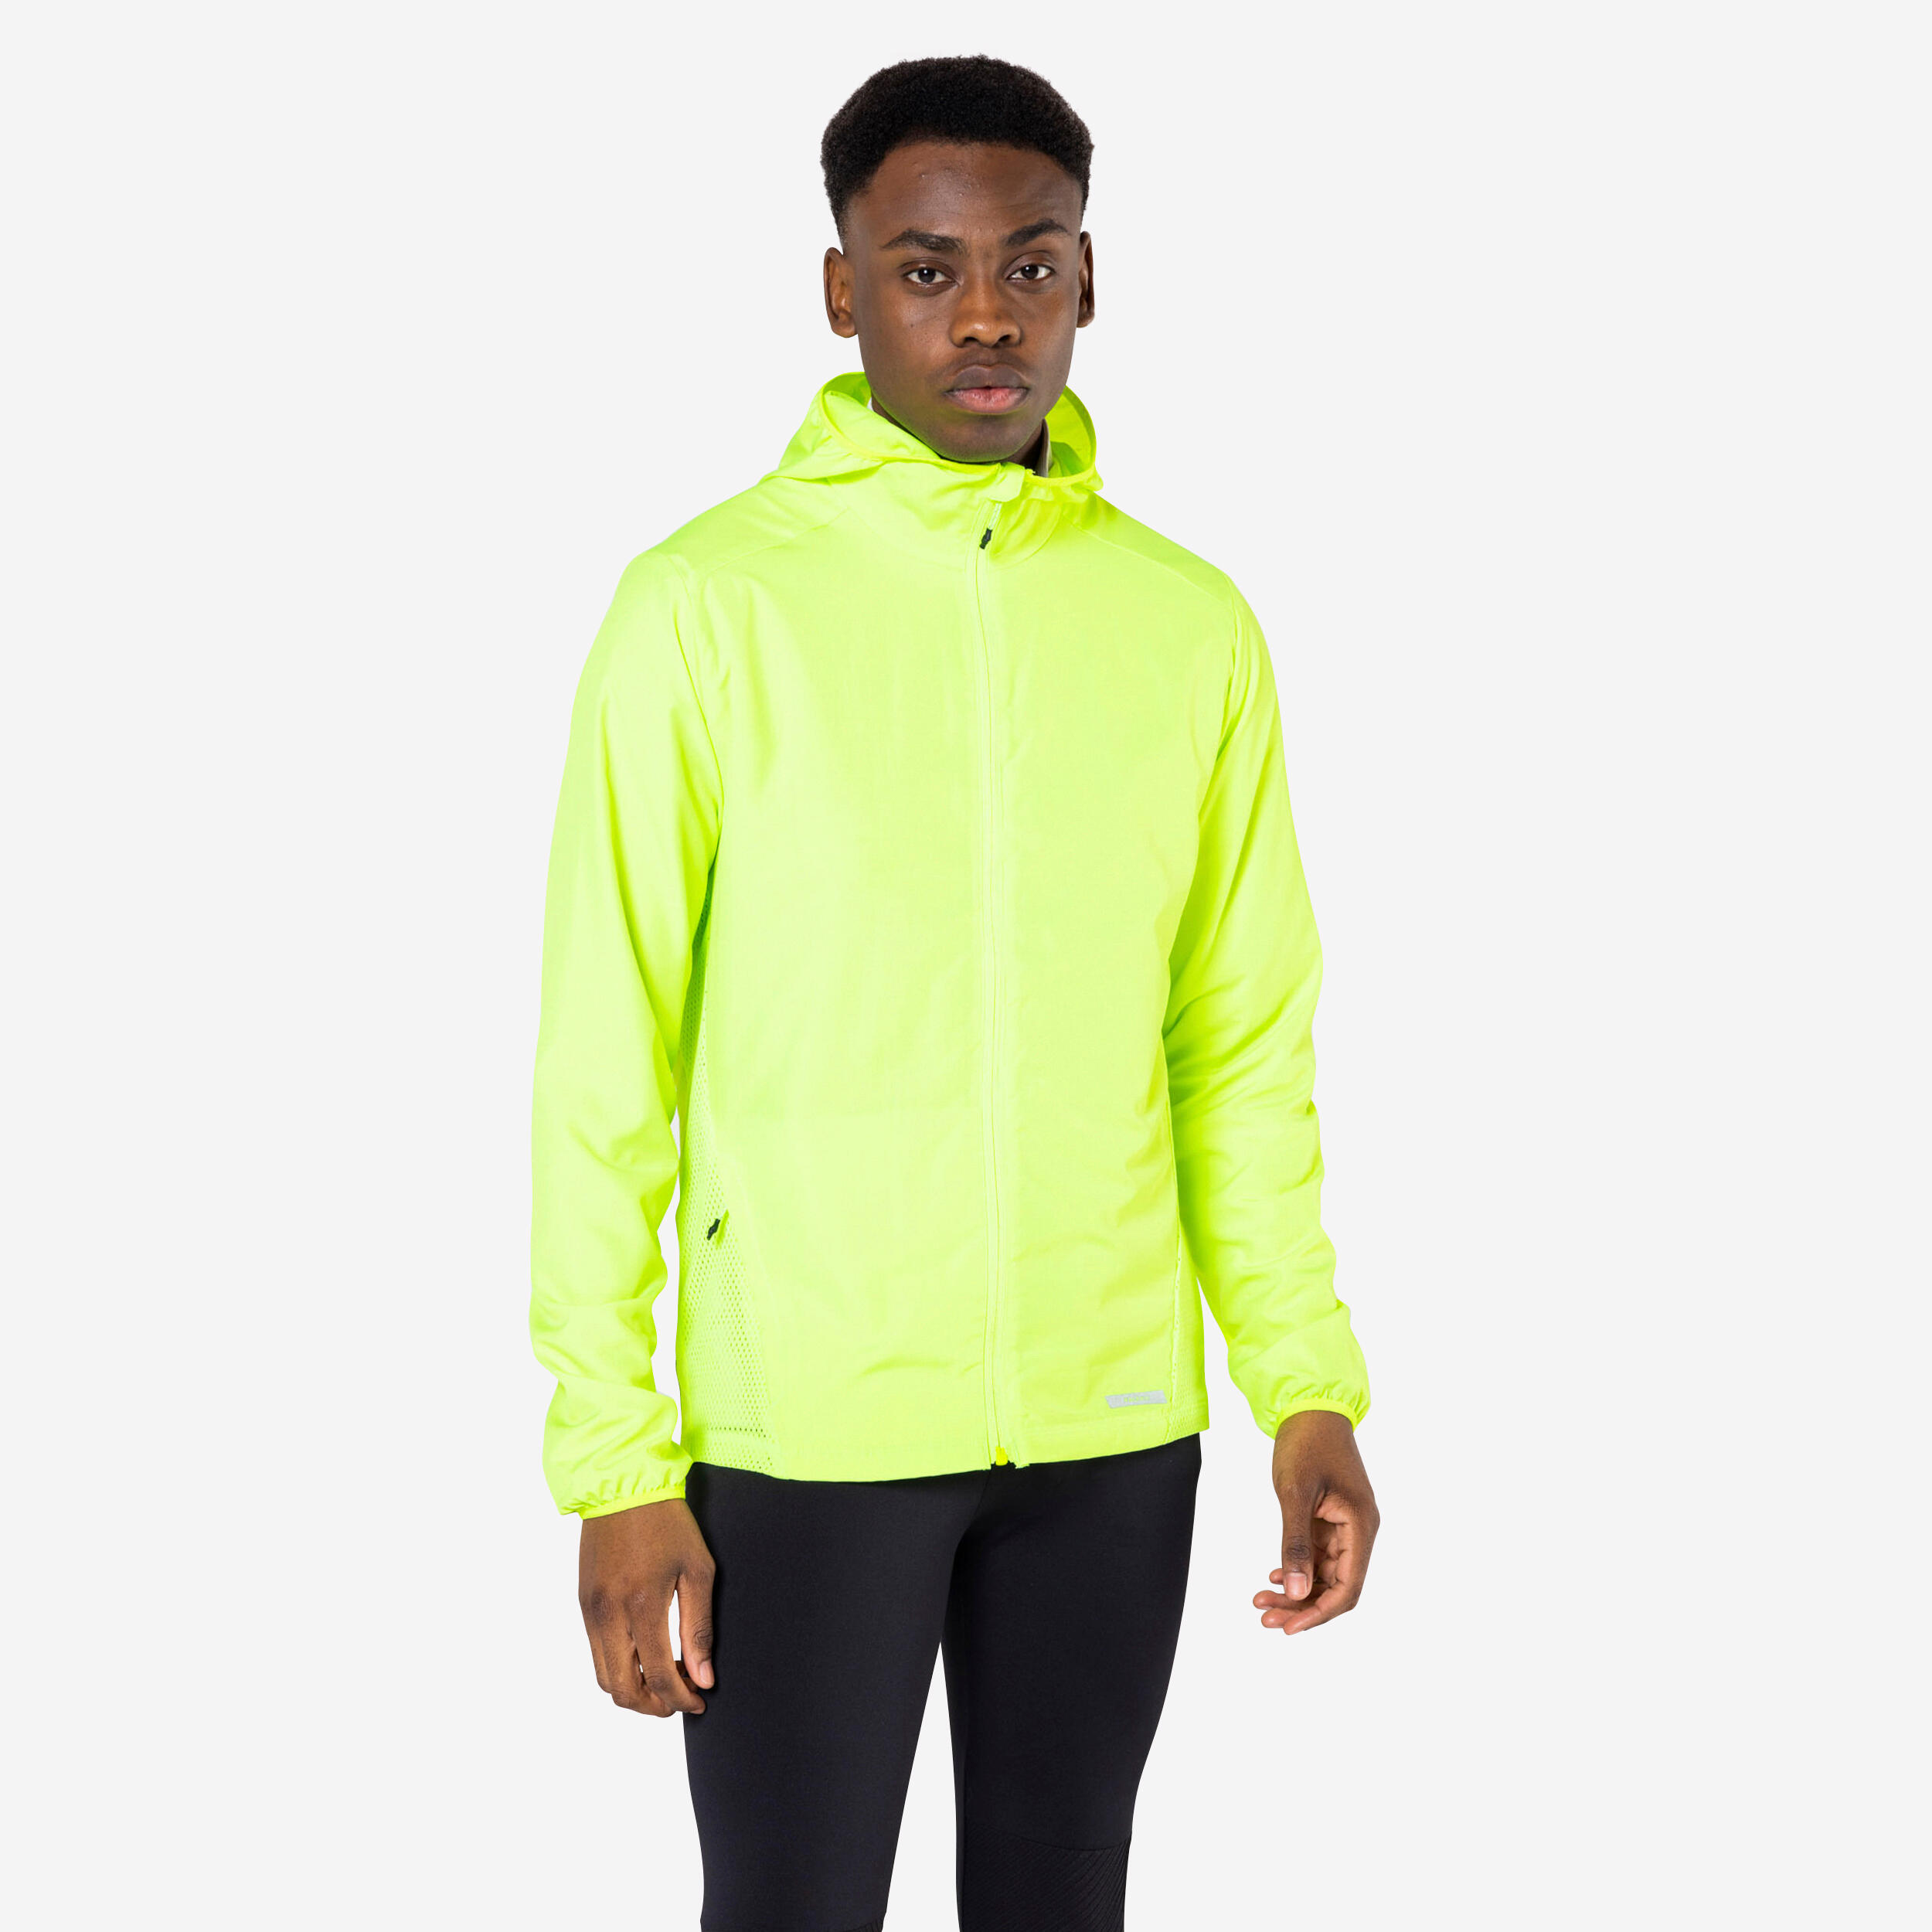 Men's High-Visibility Windproof Jacket